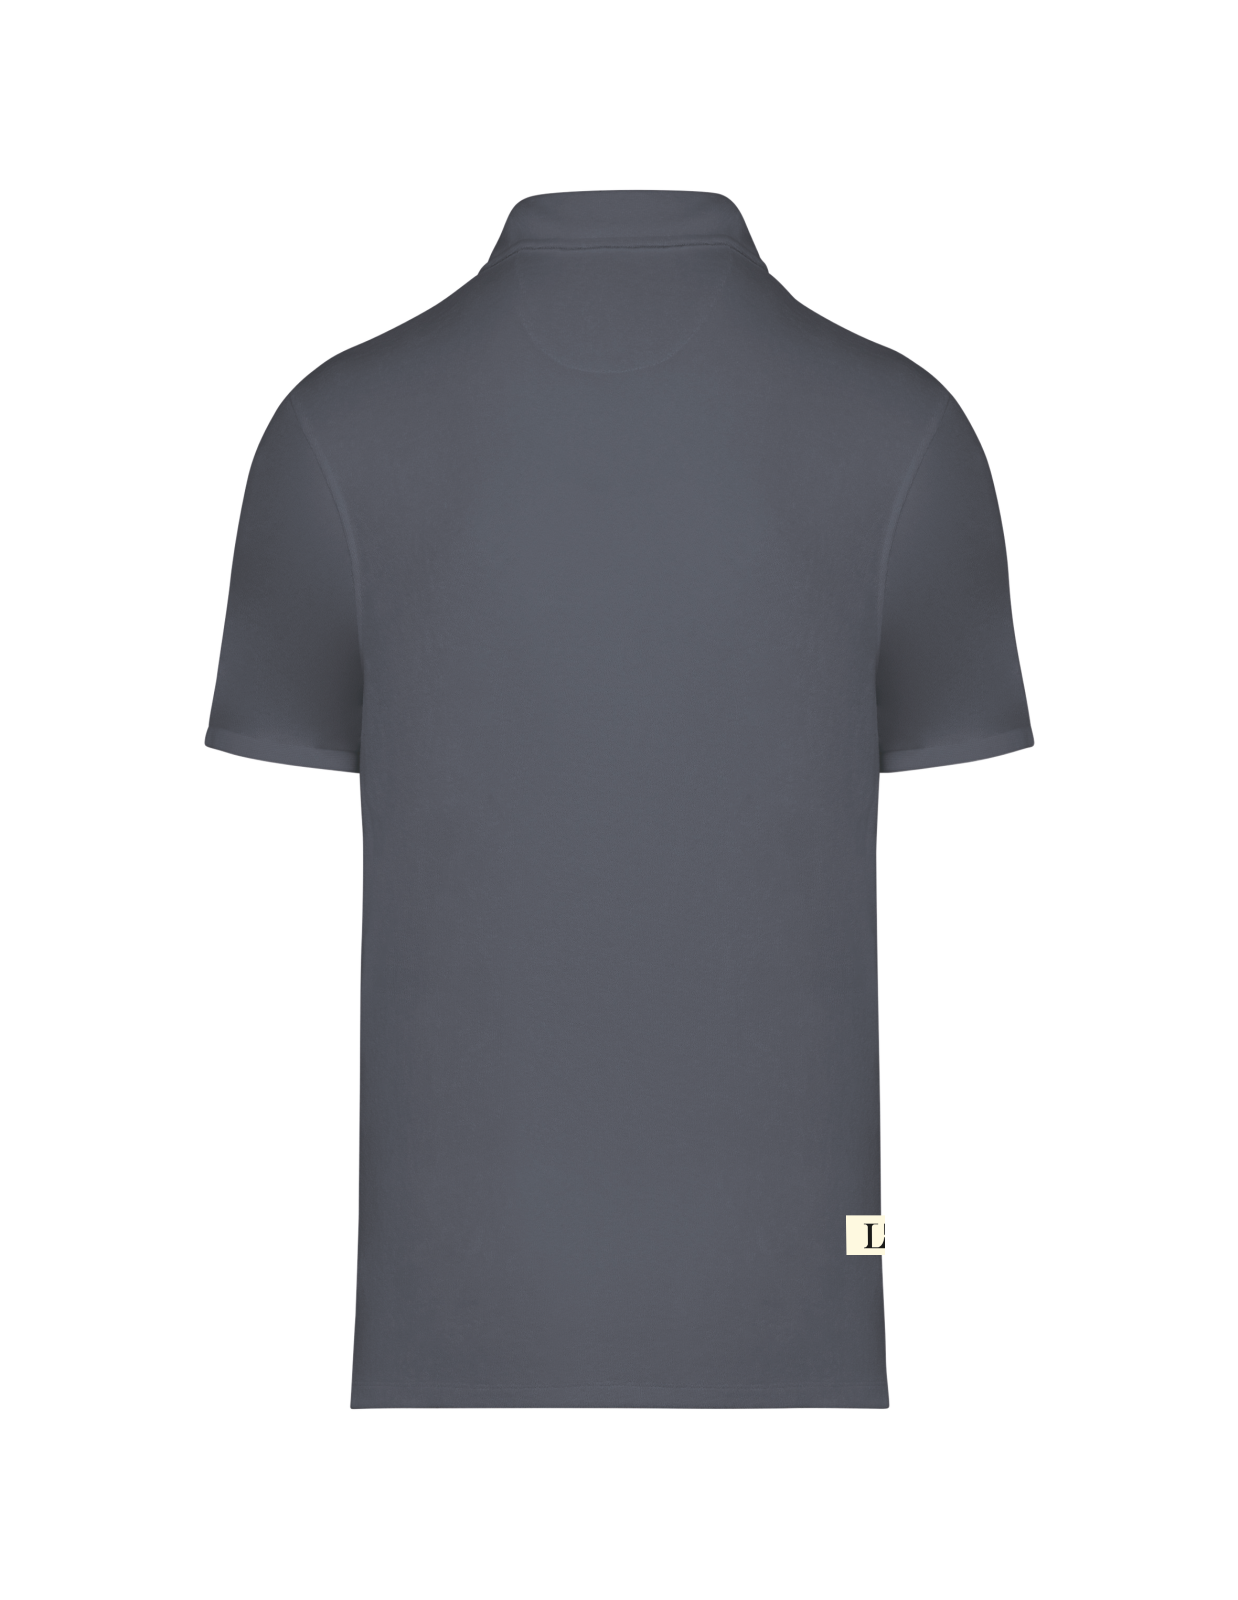 LL -Terry Towel Polo Shirt mineral grey